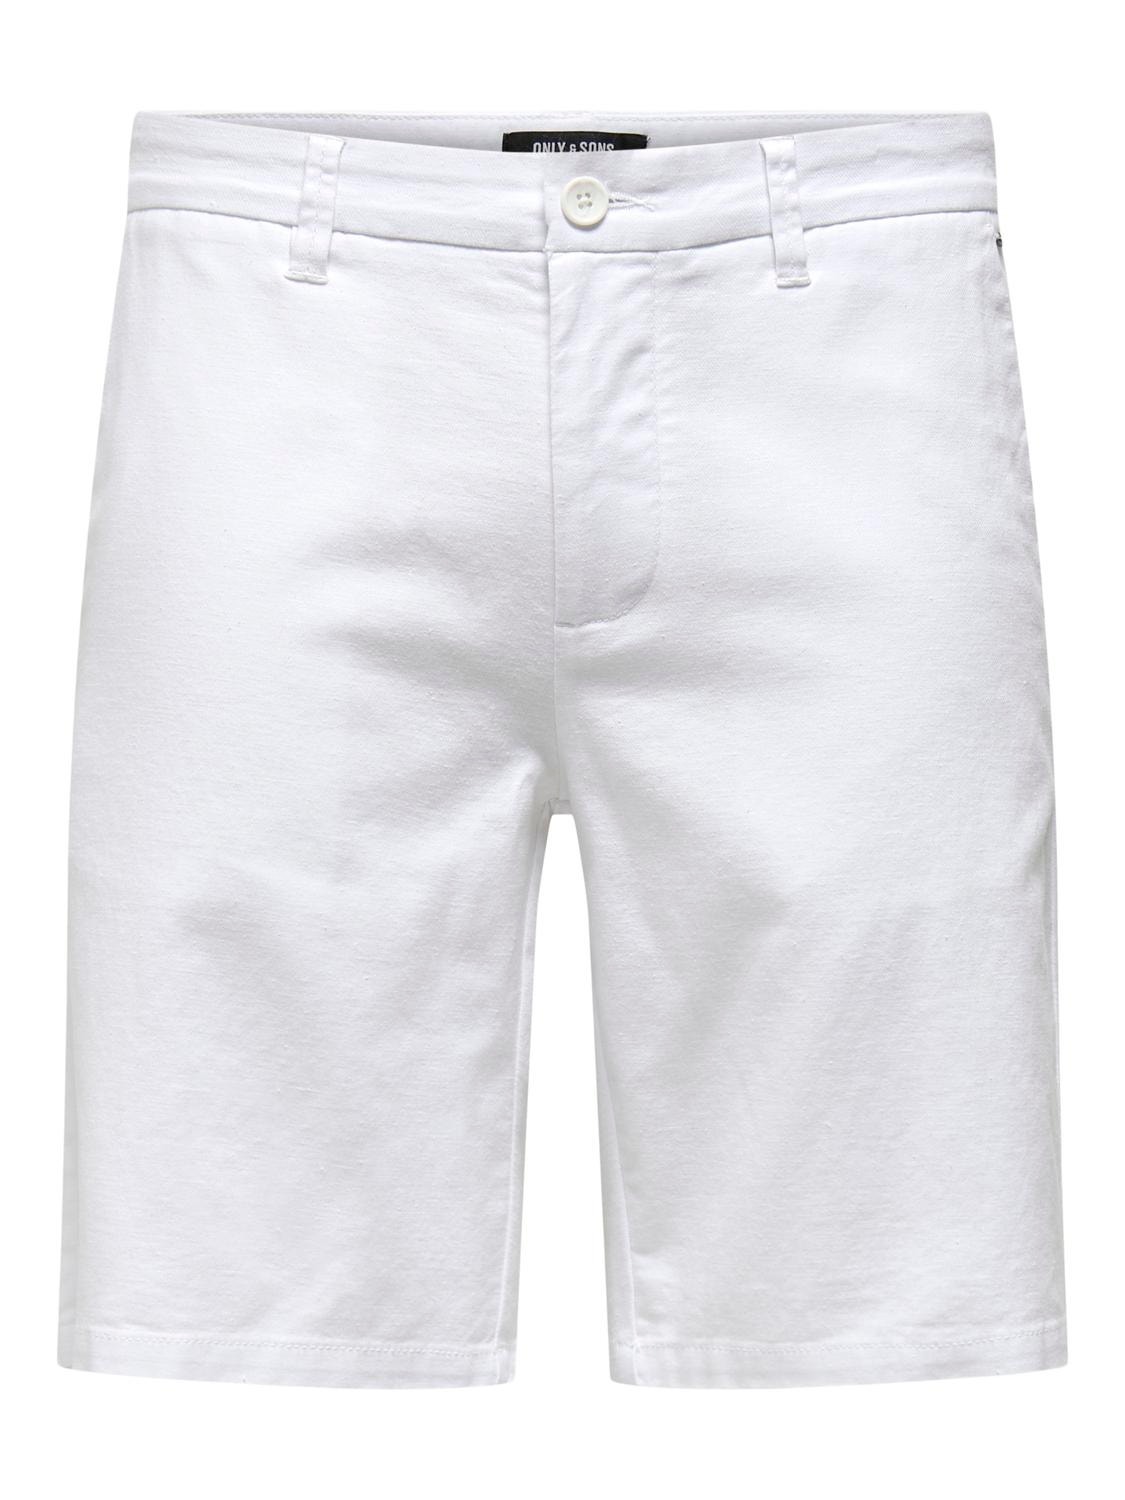 ONLY & SONS Regular Fit Shorts -White - 22024940